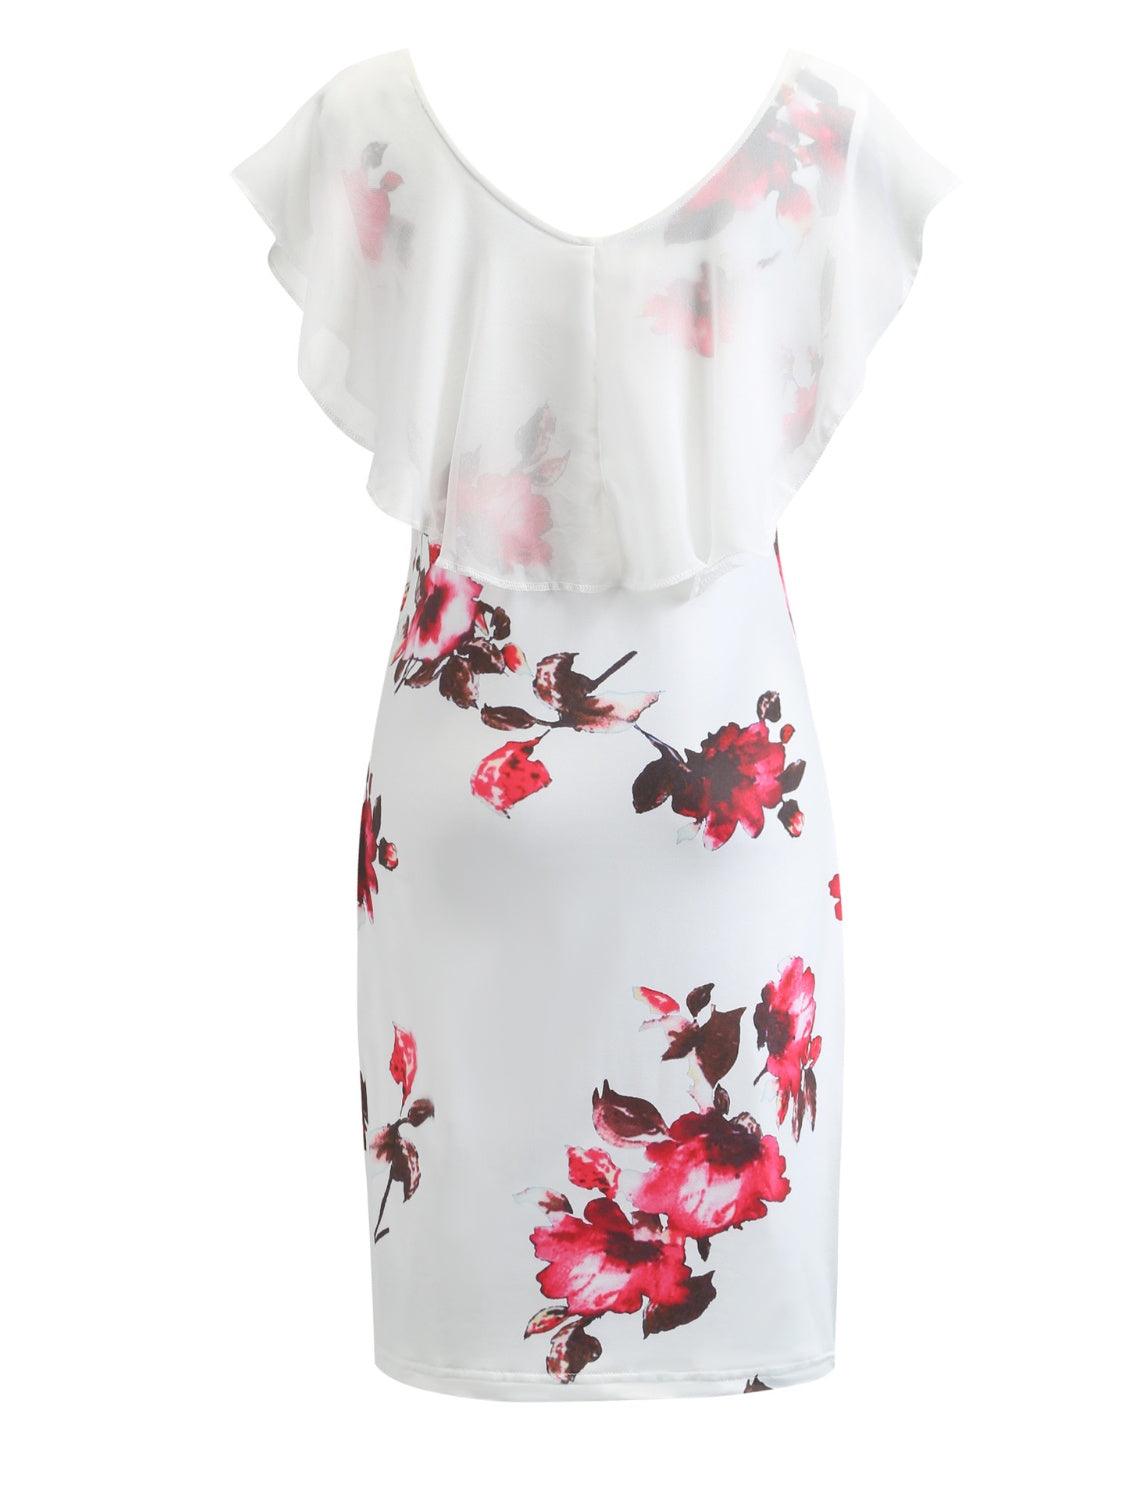 a white dress with red flowers on it